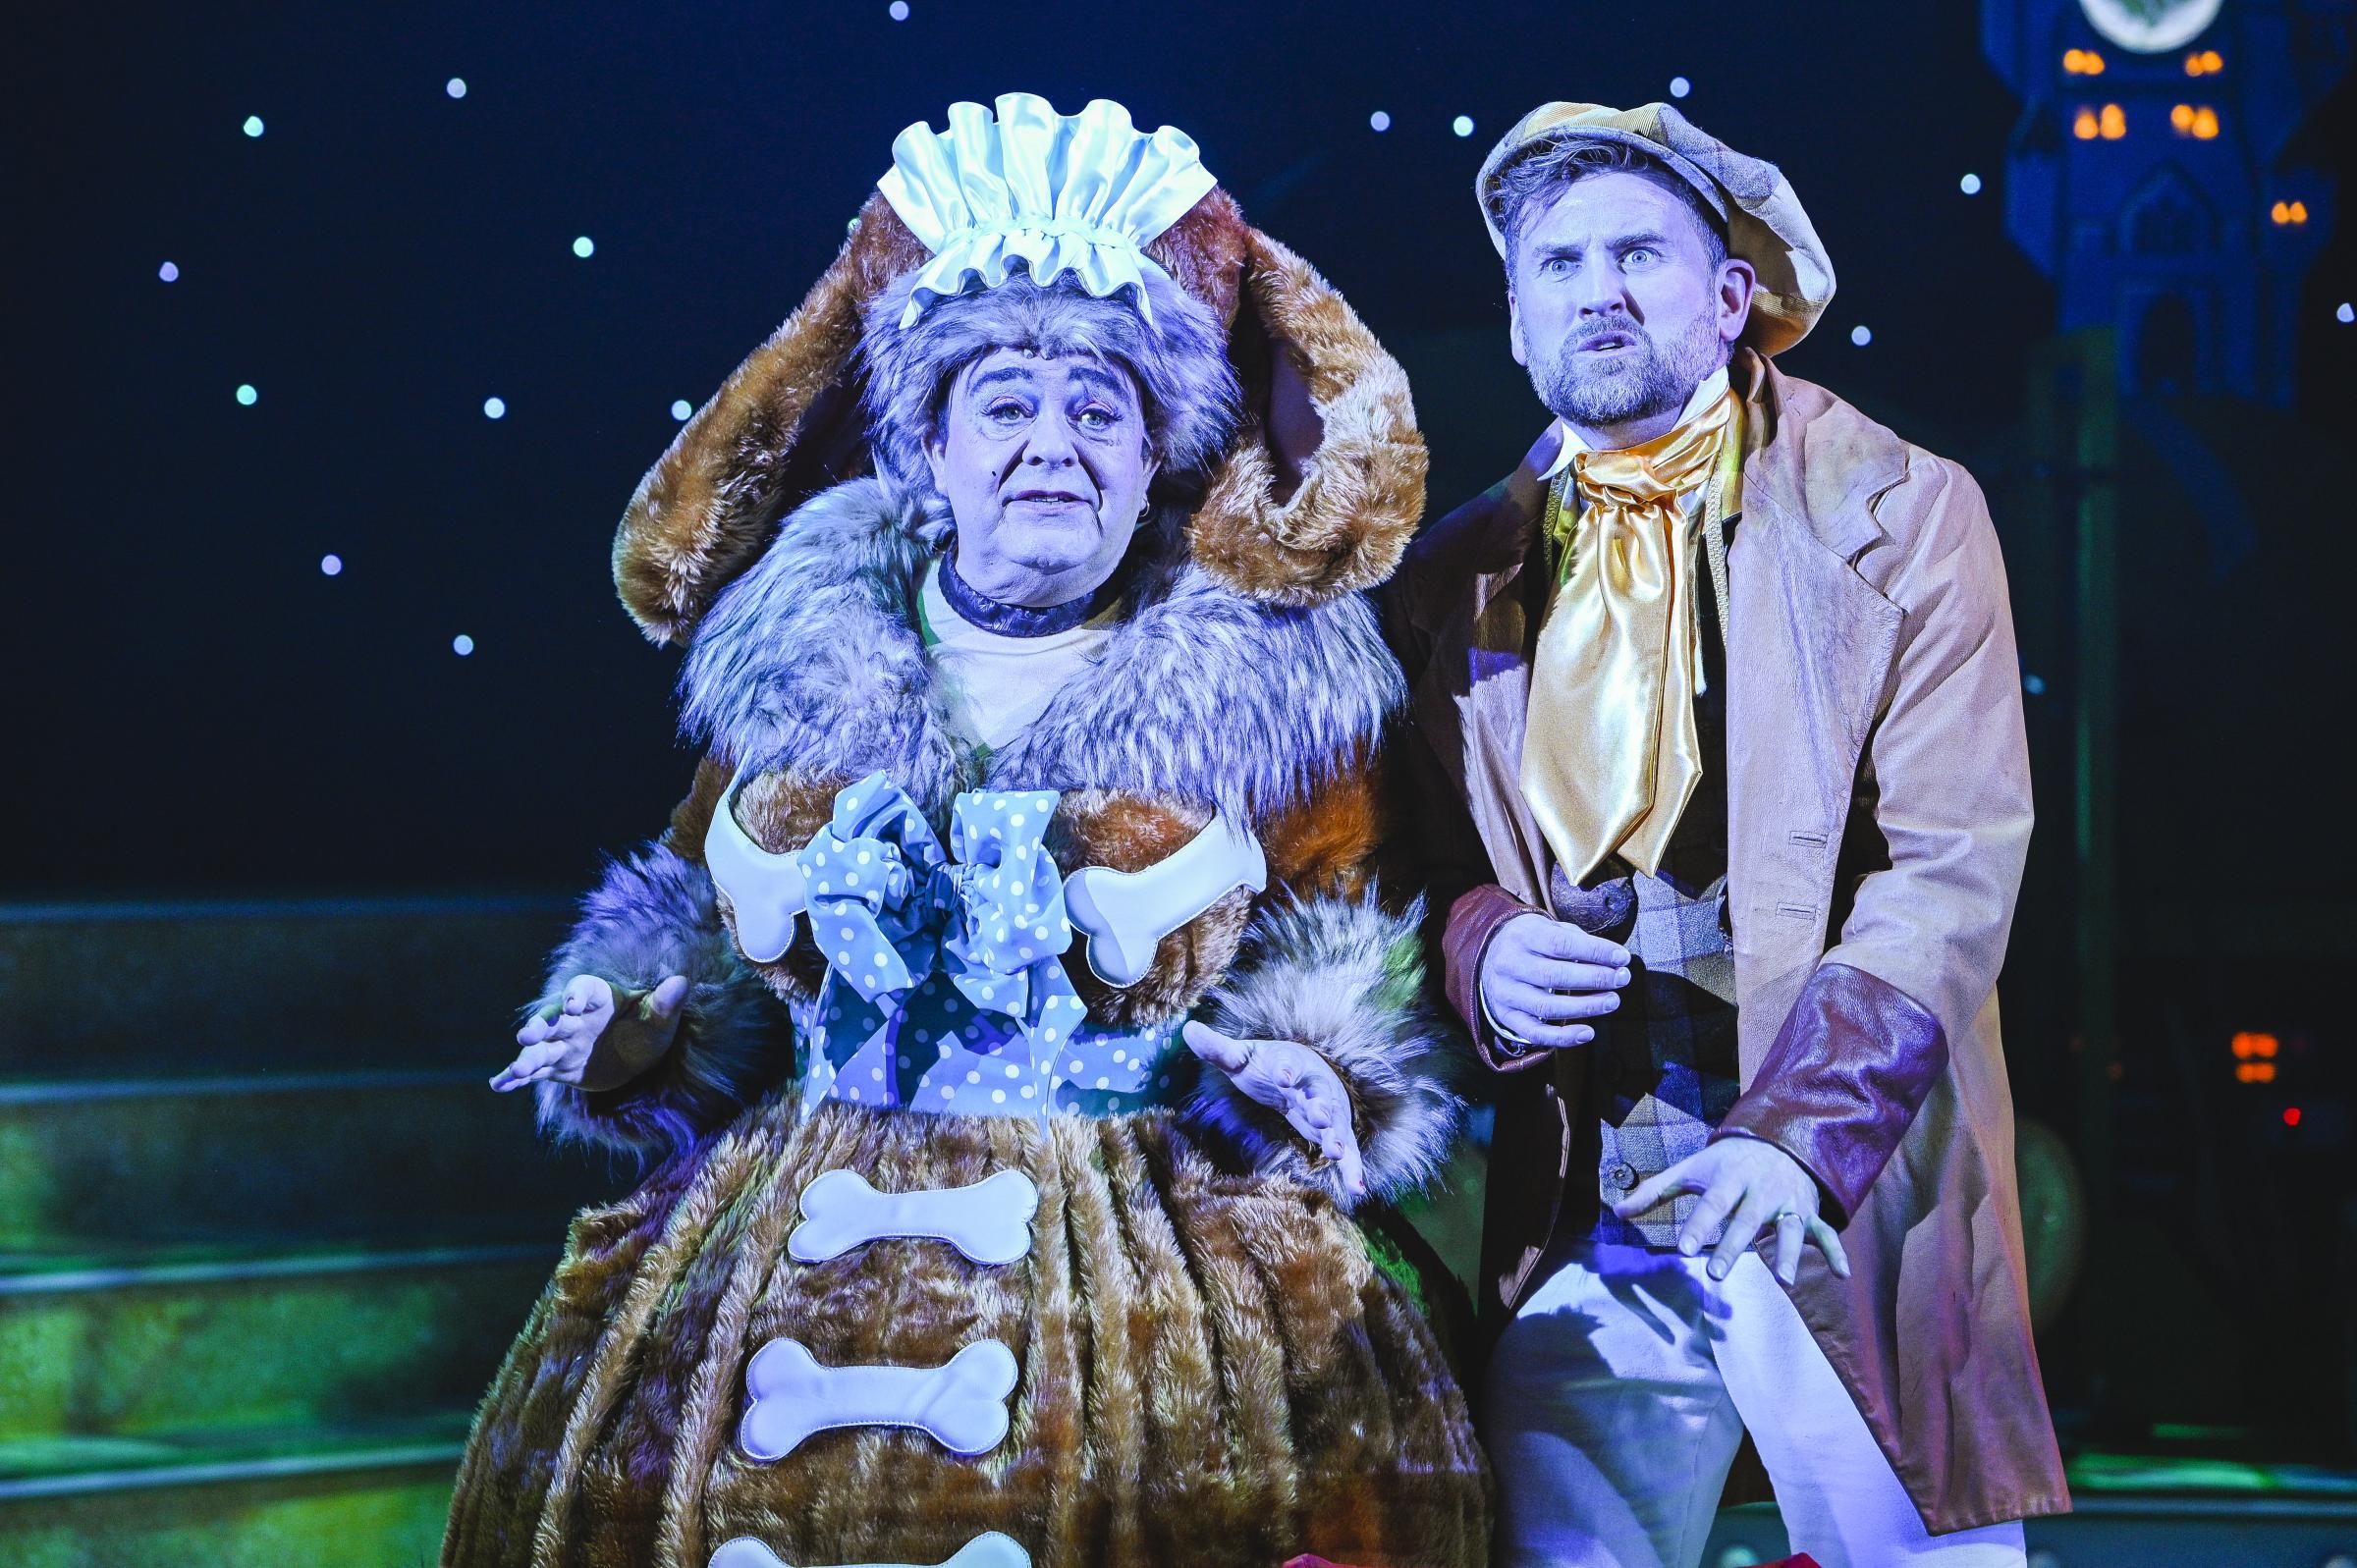 Beauty and the Beast Pantomime at Theatr Clwyd 2021 - Phylip Harries and Daniel Lloyd. Photo: Kirsten McTernan 